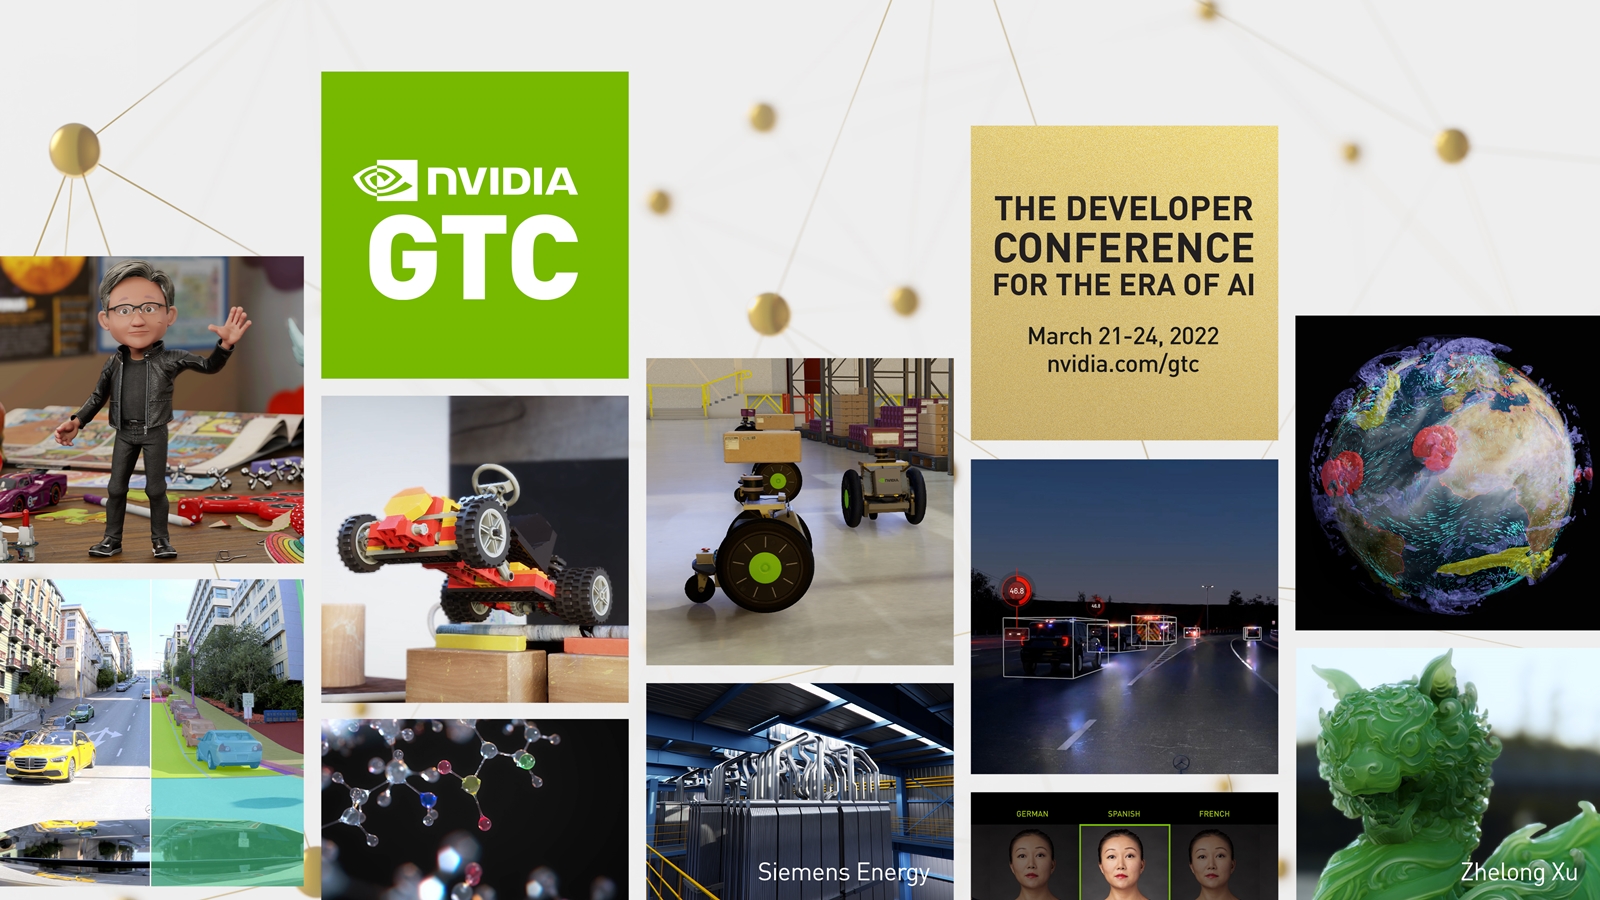 NVIDIA announces its GTC conference, which will be held virtually from March 21-24.